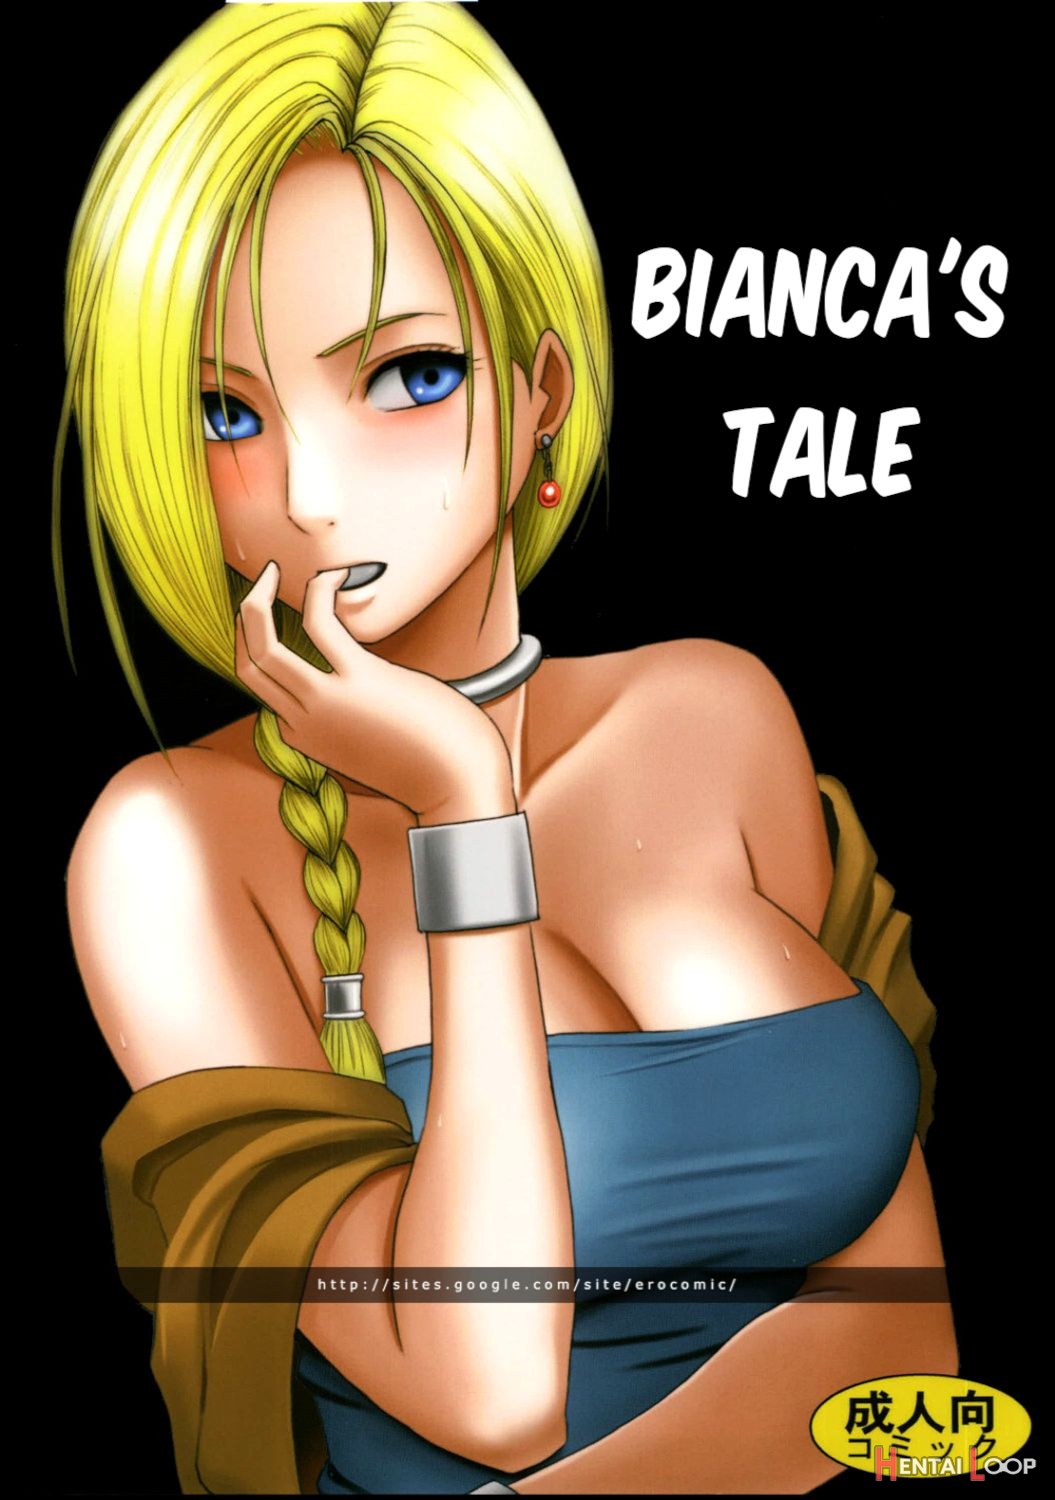 Bianca's Tale page 1